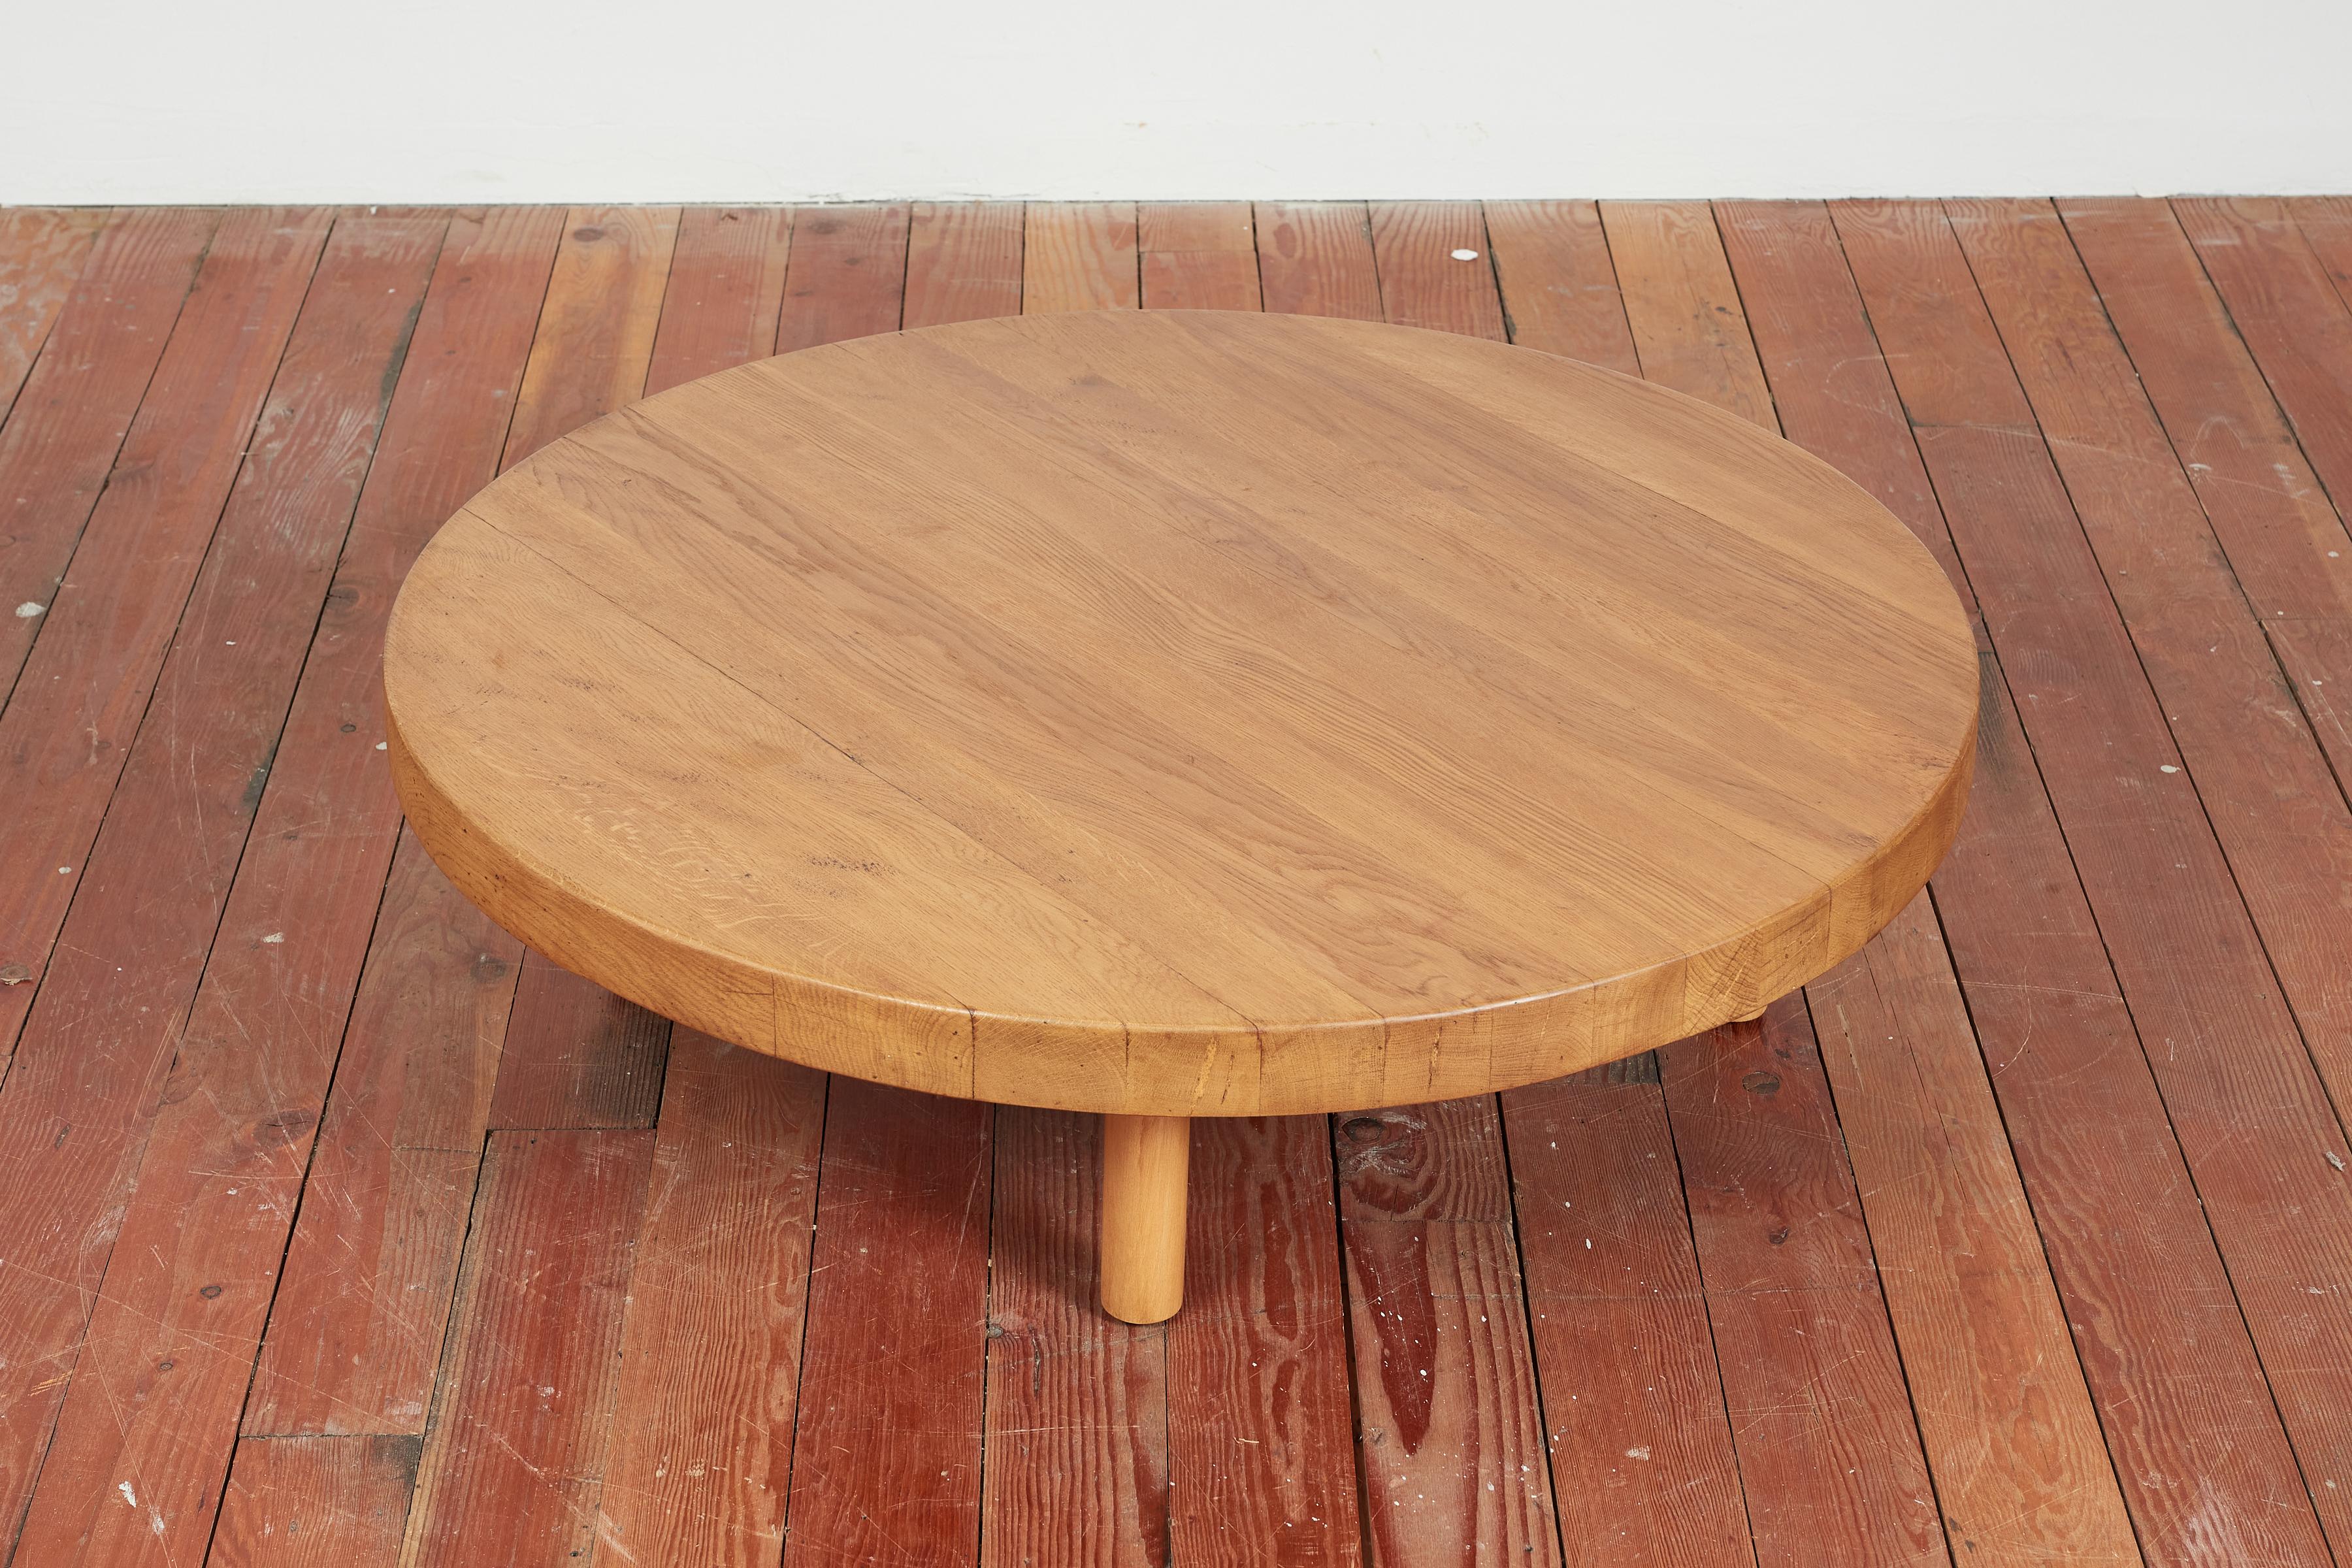 Mid-20th Century French Oak Coffee Table For Sale